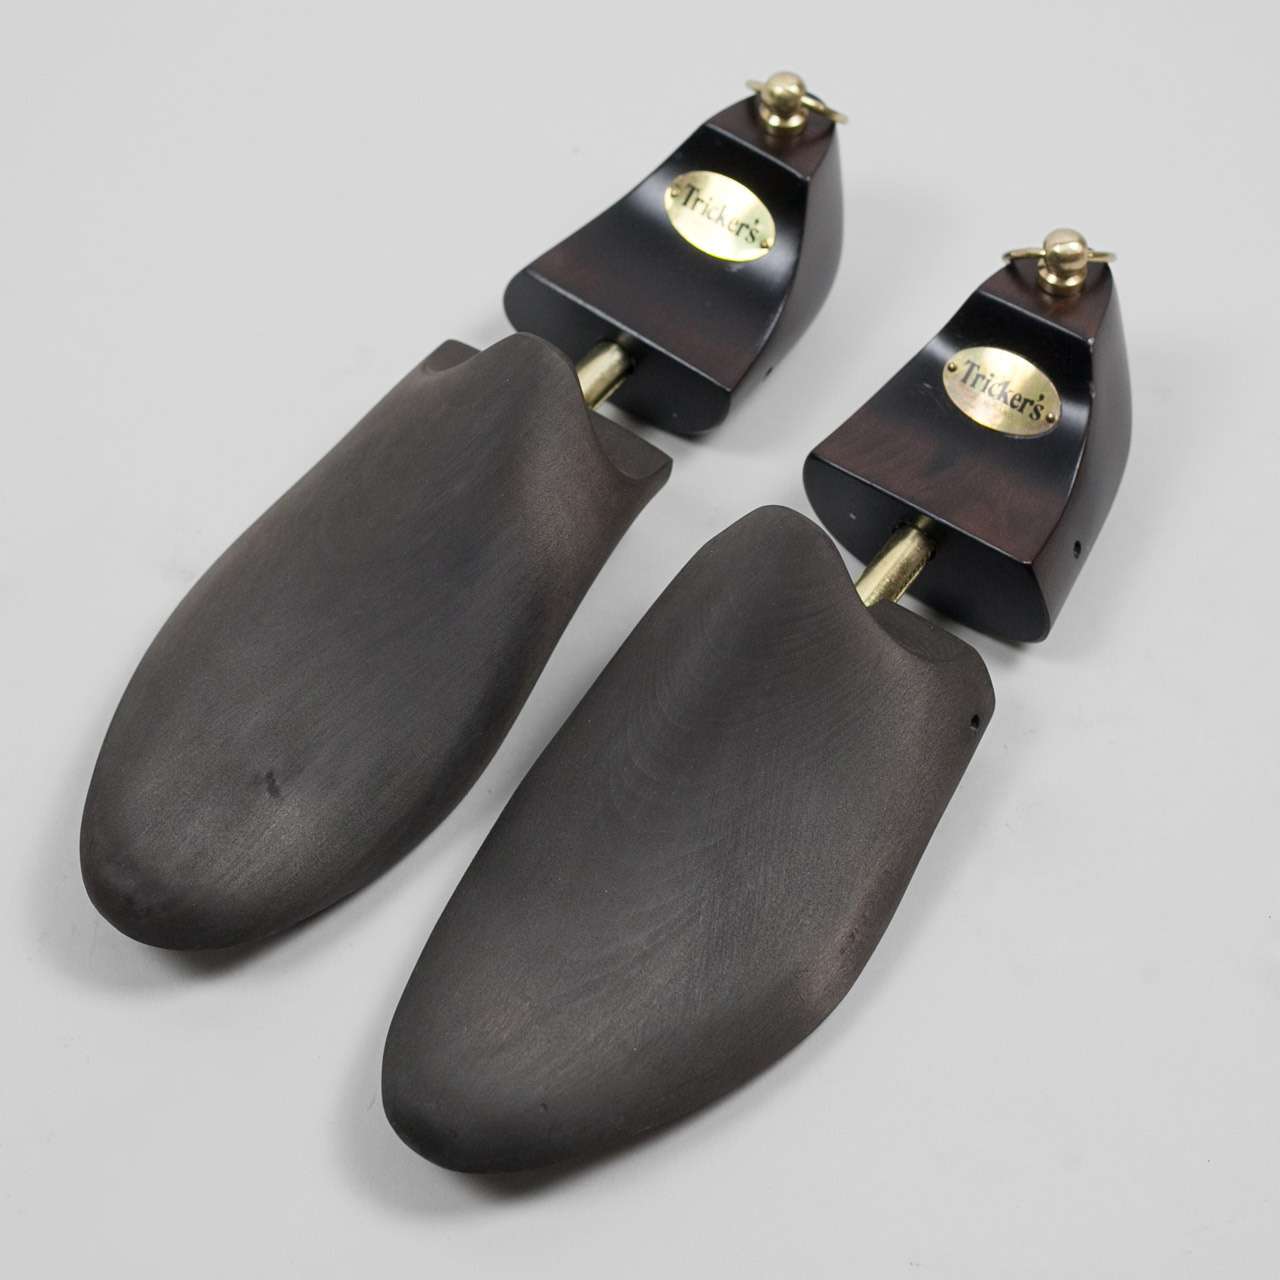 TRICKERS // Wooden Shoe Trees // NEW!!!